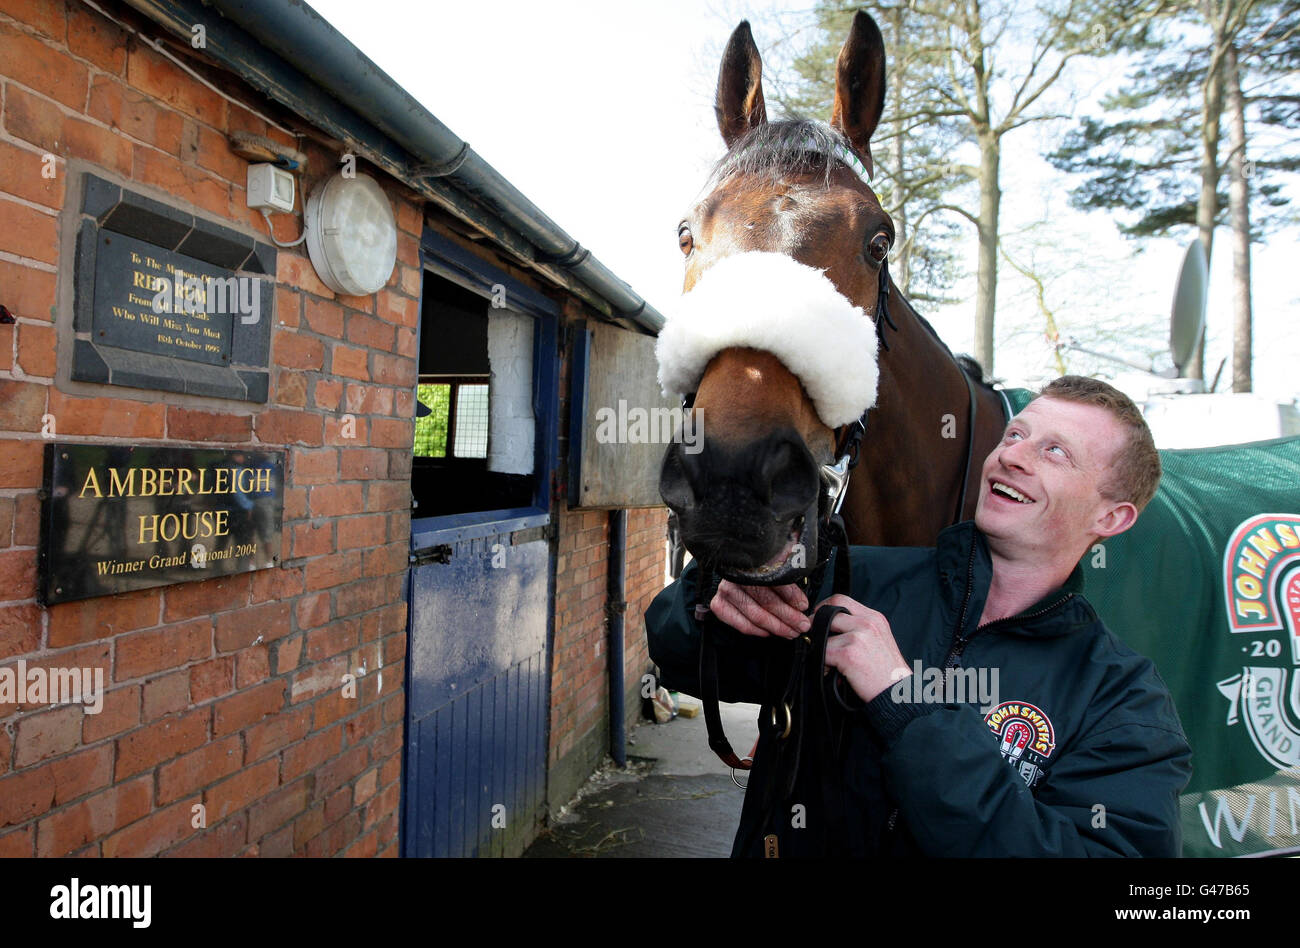 Works rider Edward Bourne smiles at Grand National winner Ballabriggs during a Homecoming Photocall at the stables in Malpas, Cheshire, PRESS ASSOCIATIOIN Photo. Picture date: Sunday April 10, 2011. The win was trainer Donald McCain's first in the race. His father Donald 'Ginger' McCain trained two horses to four National wins, Red Rum 3 times and Amberleigh House in 2004. Photo credit should read: Dave Thompson/PA Wire Stock Photo